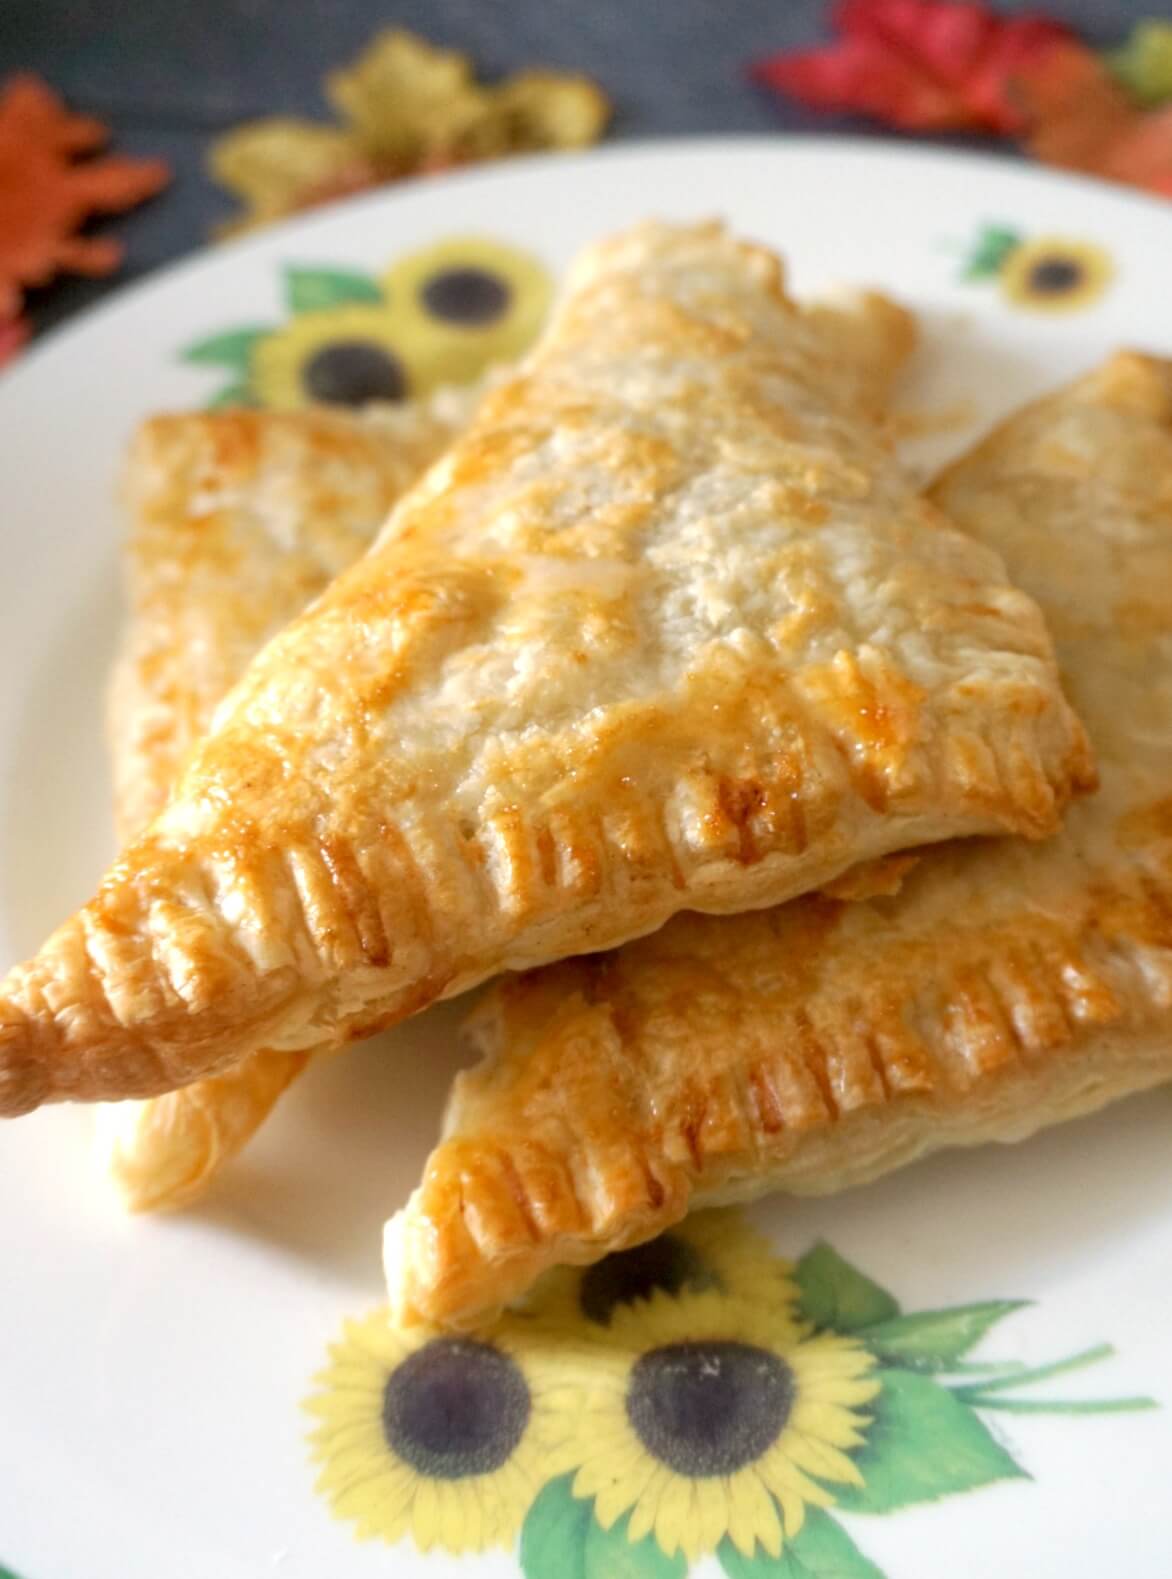 A stack of 3 apple turnovers on a large plate.